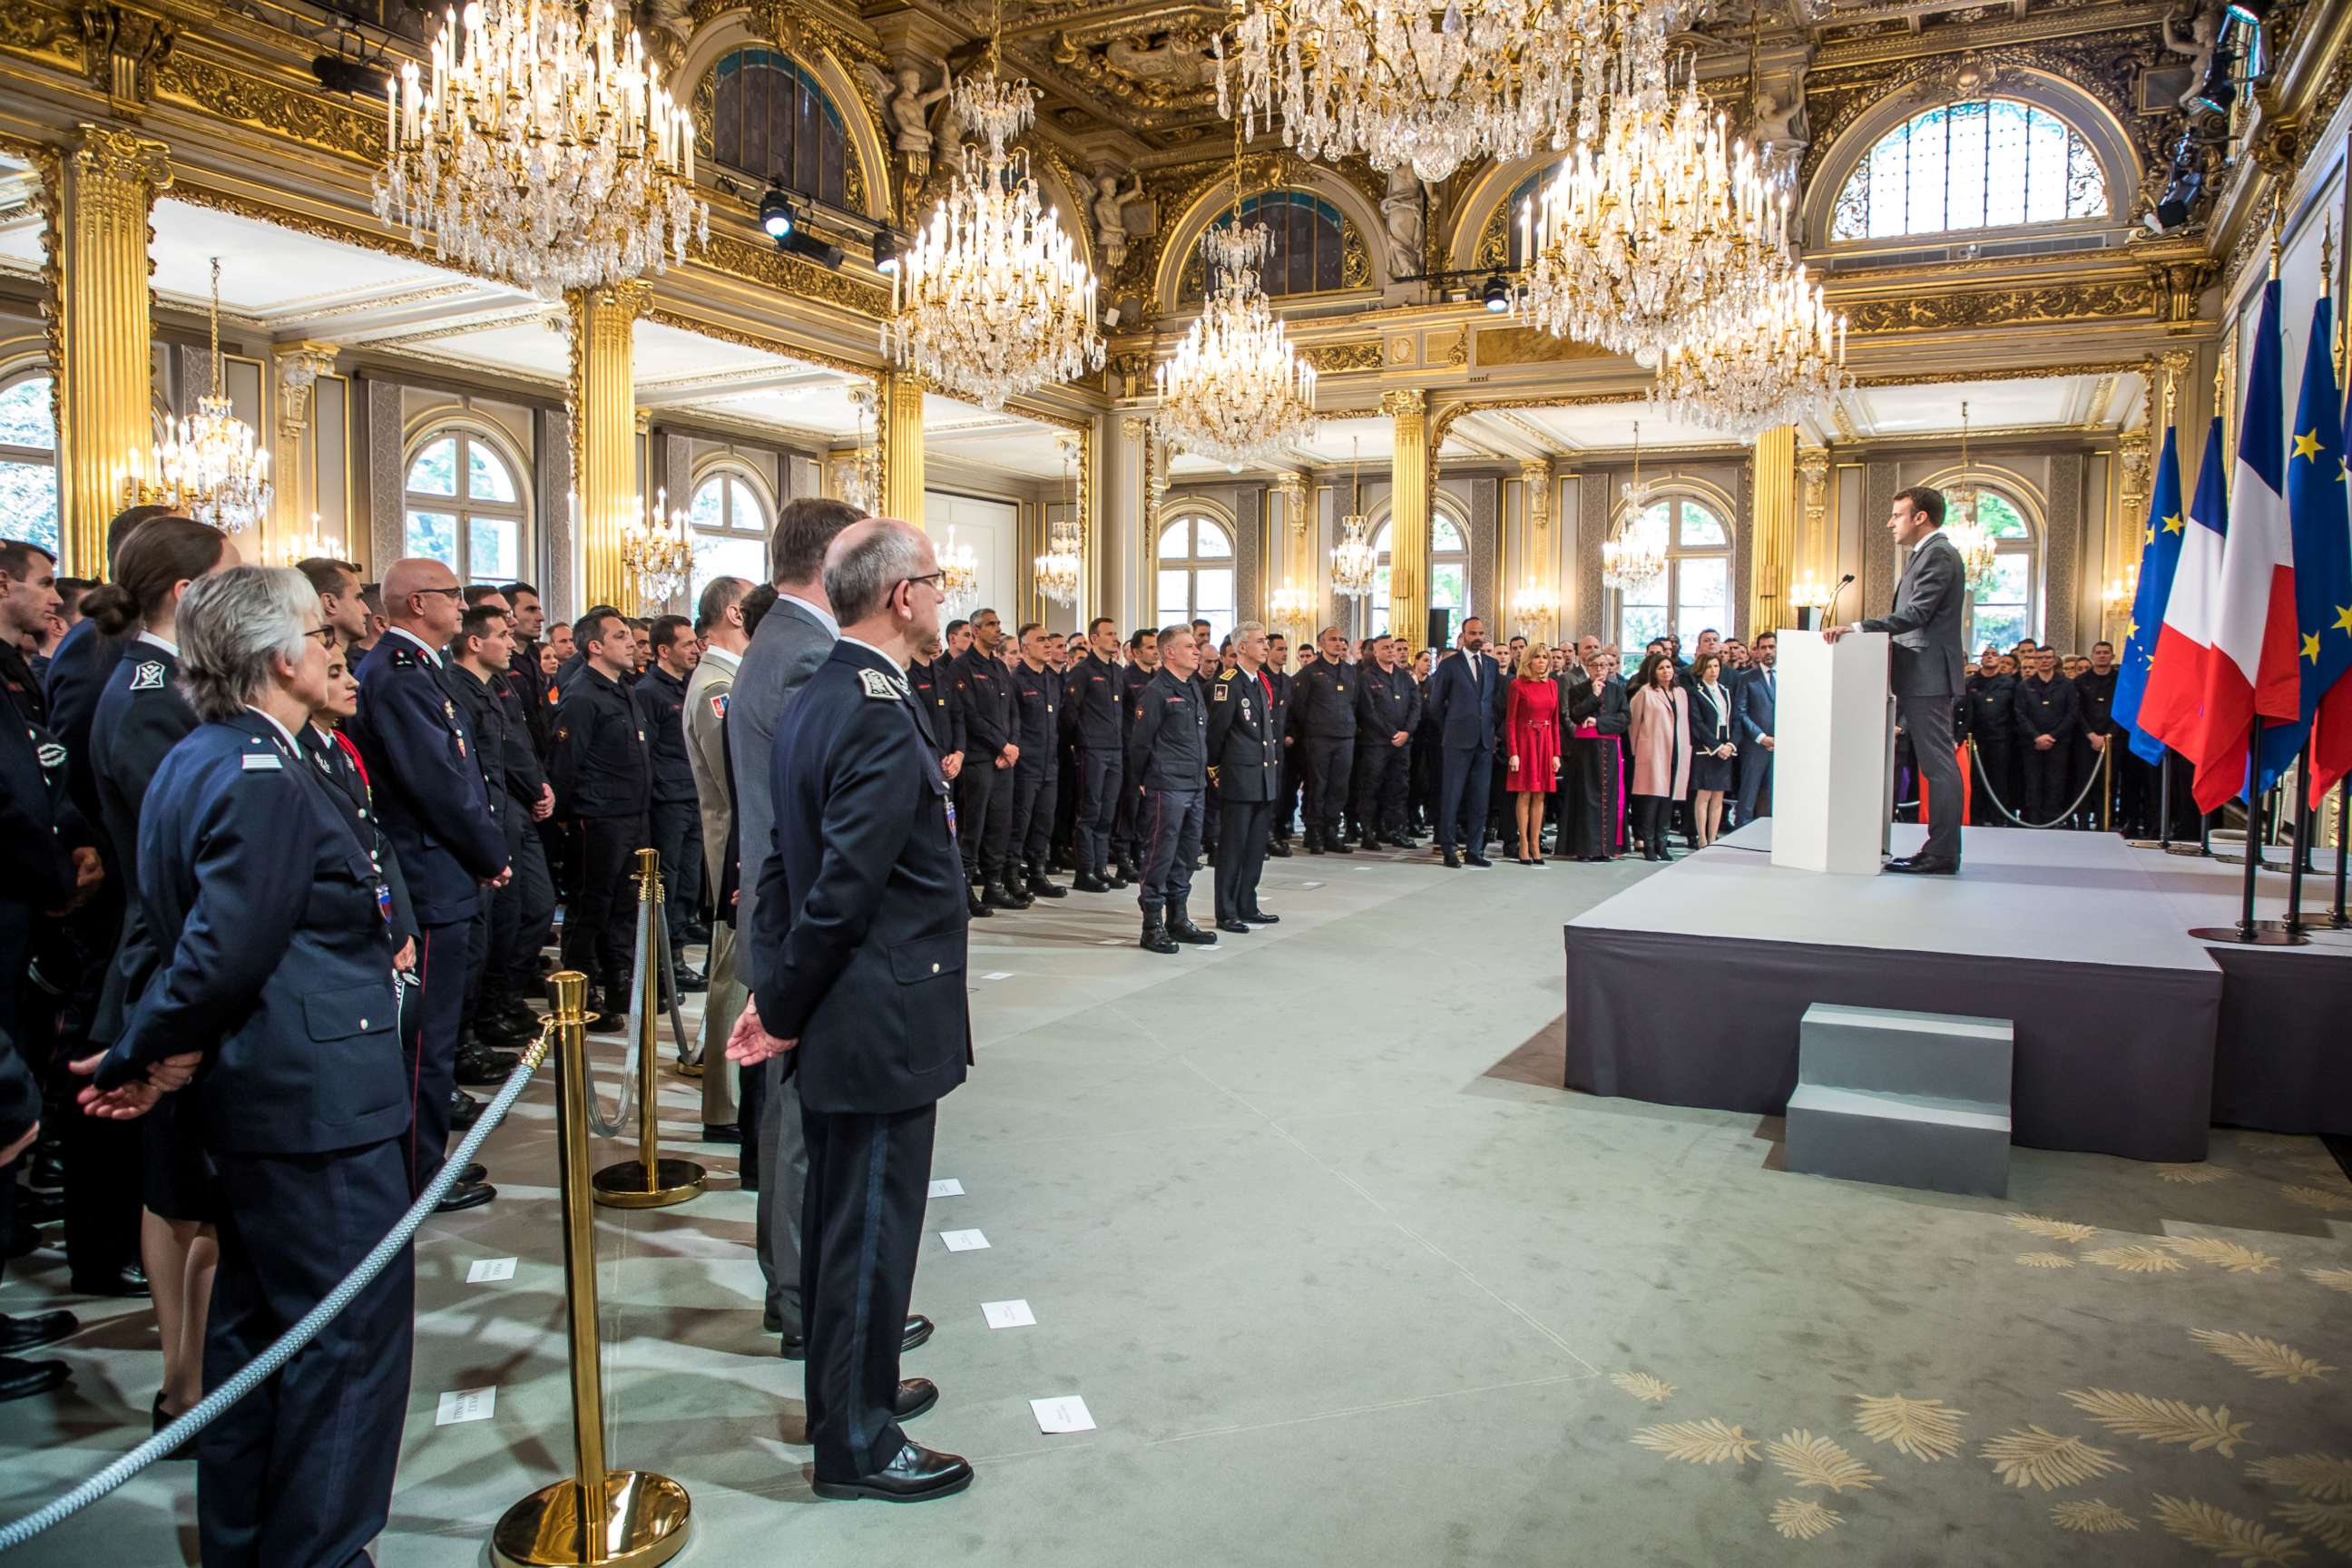 PHOTO: French President Emmanuel Macron delivers a speech for the Parisian Firefighters' brigade and security forces who took part at the fire extinguishing operations during the Notre Dame Cathedral fire, at Elysee Palace in Paris, April 18, 2019.